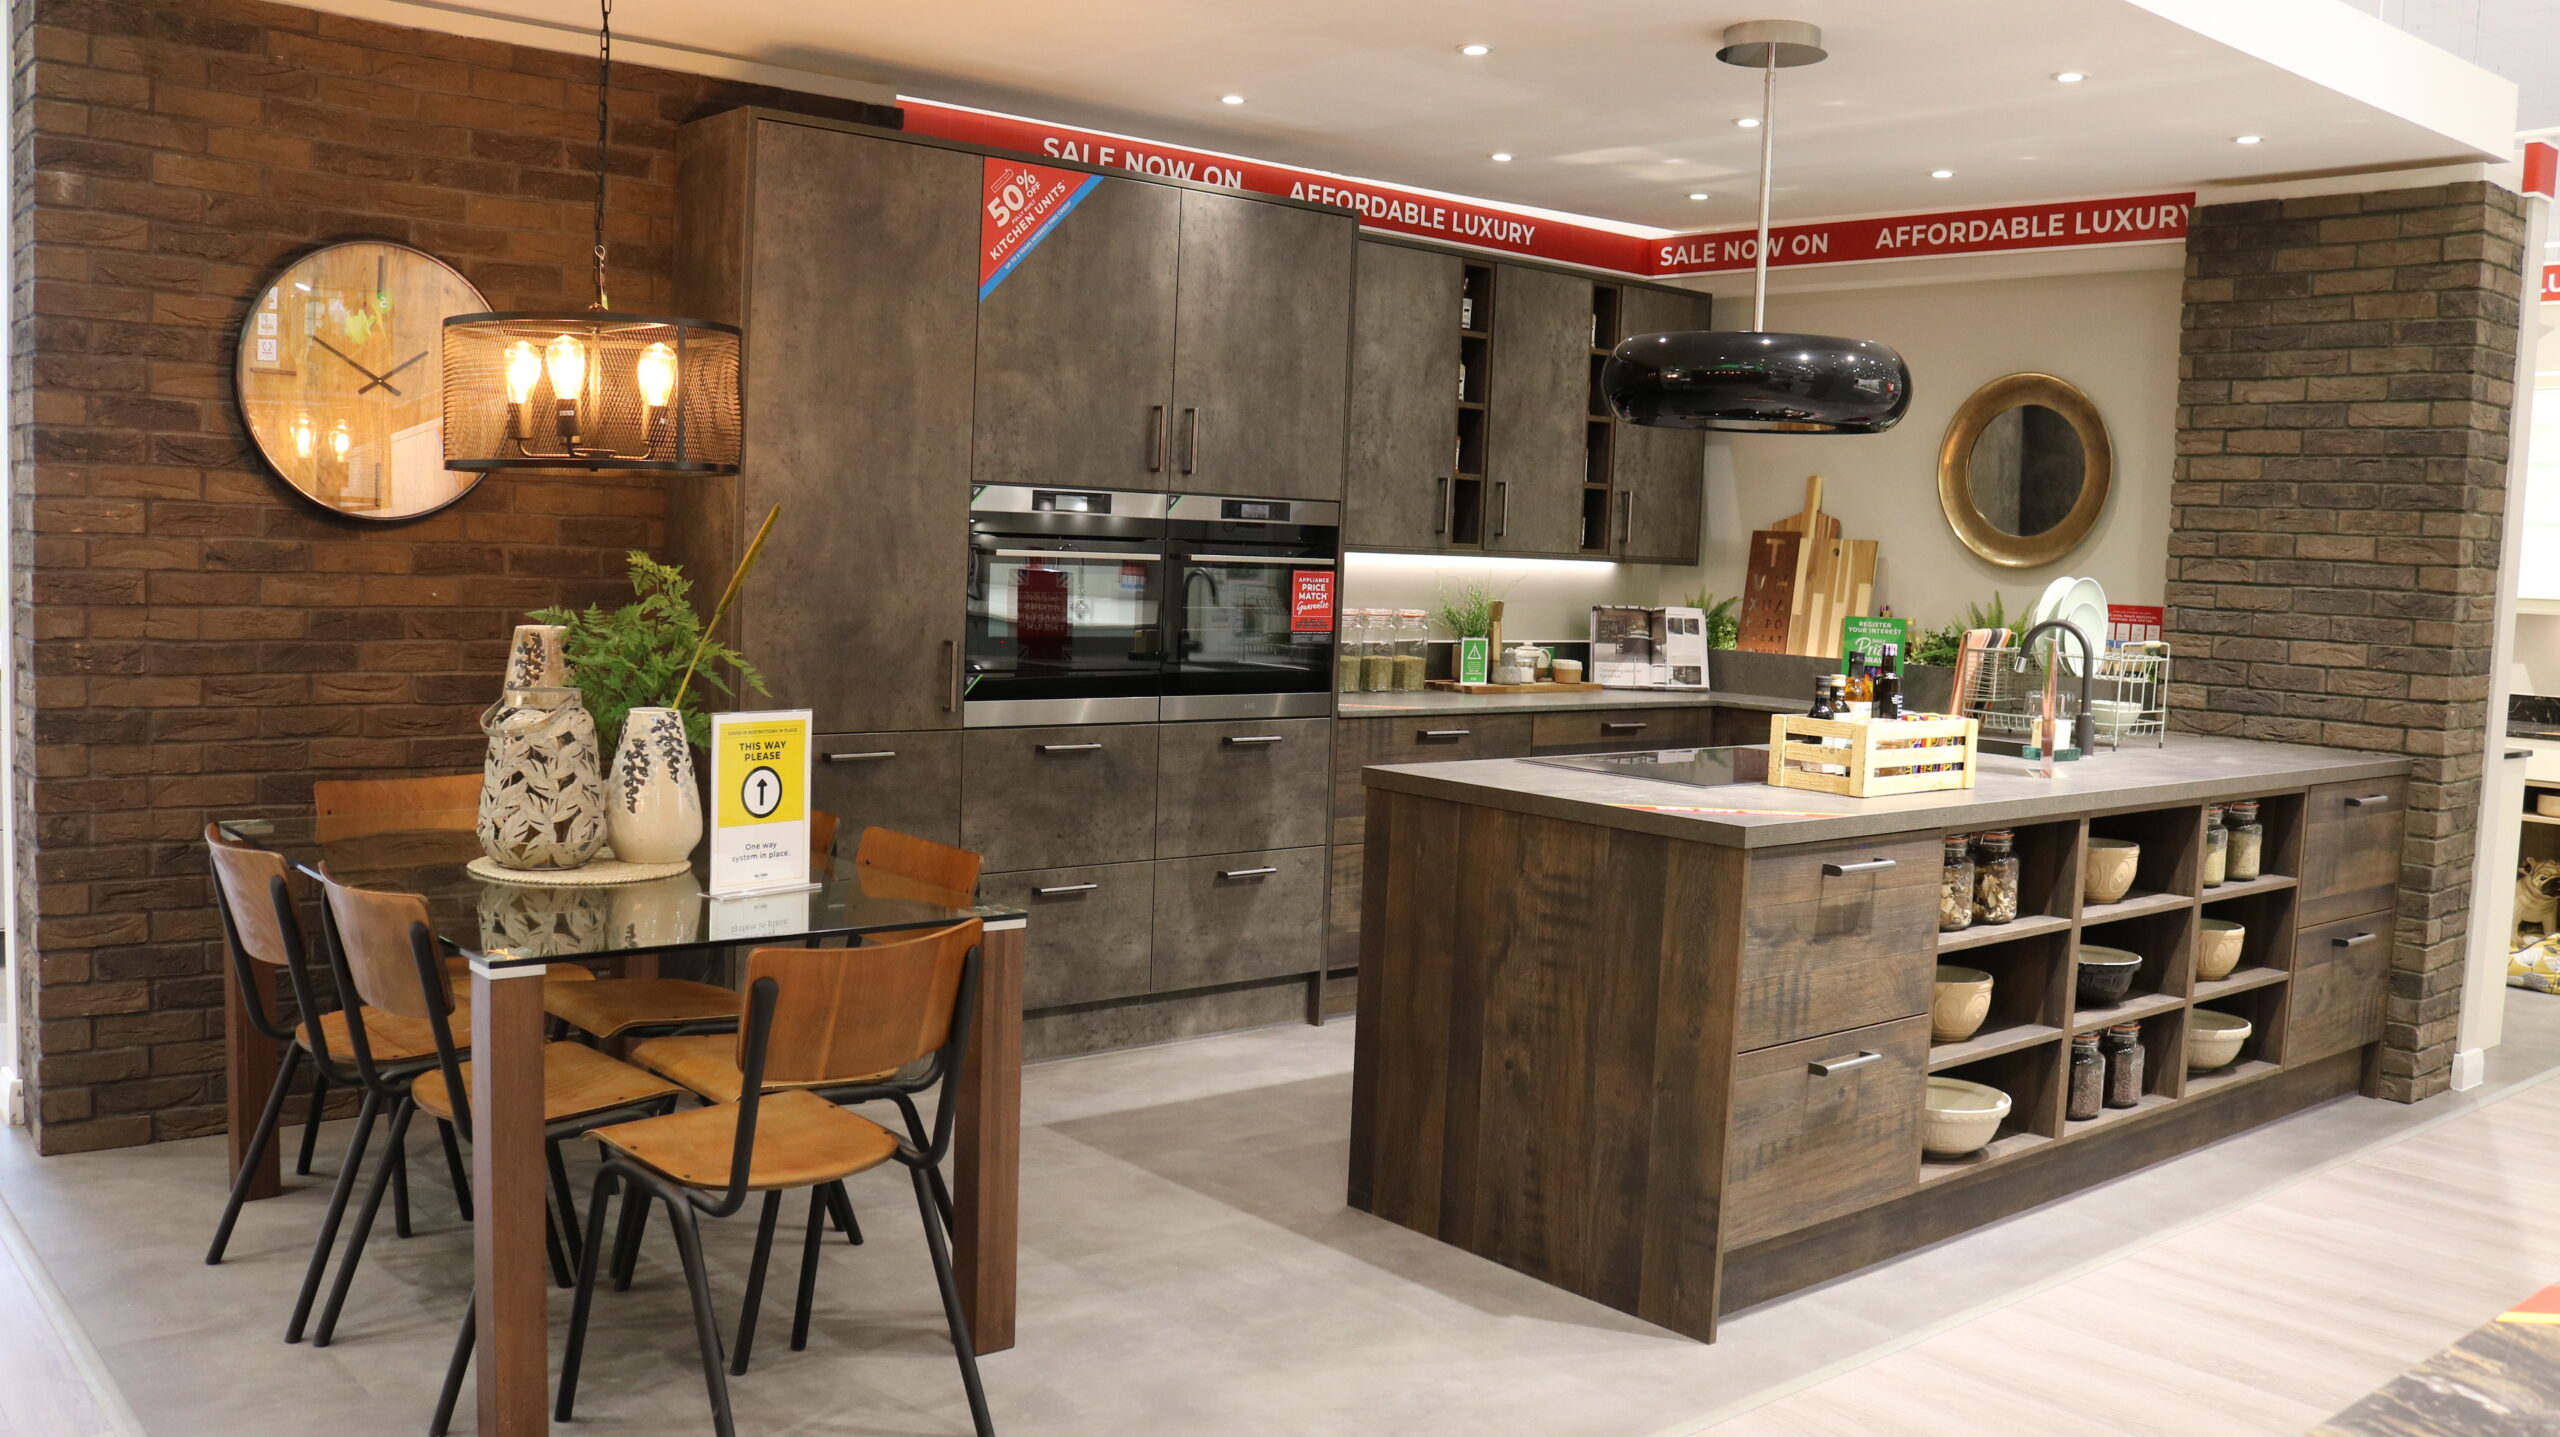 Wren Kitchens Opens In Durham With State Of The Art Showroom Retail Focus Retail Design